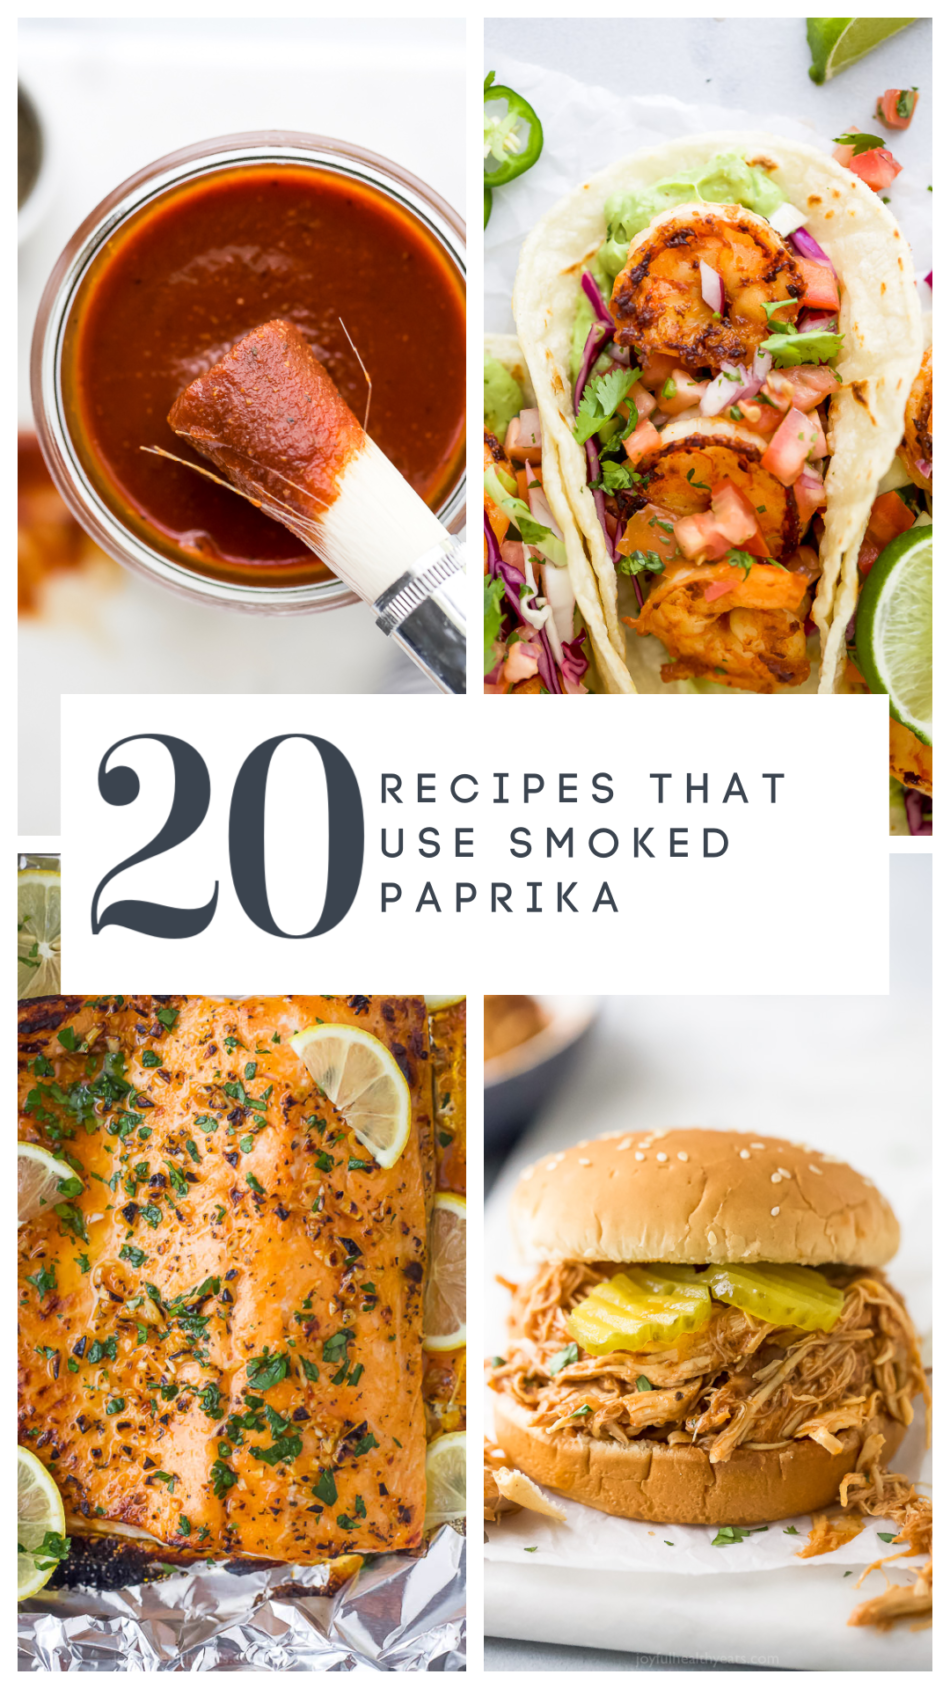 What Is Smoked Paprika? (Plus 20 Easy & Healthy Recipes!)